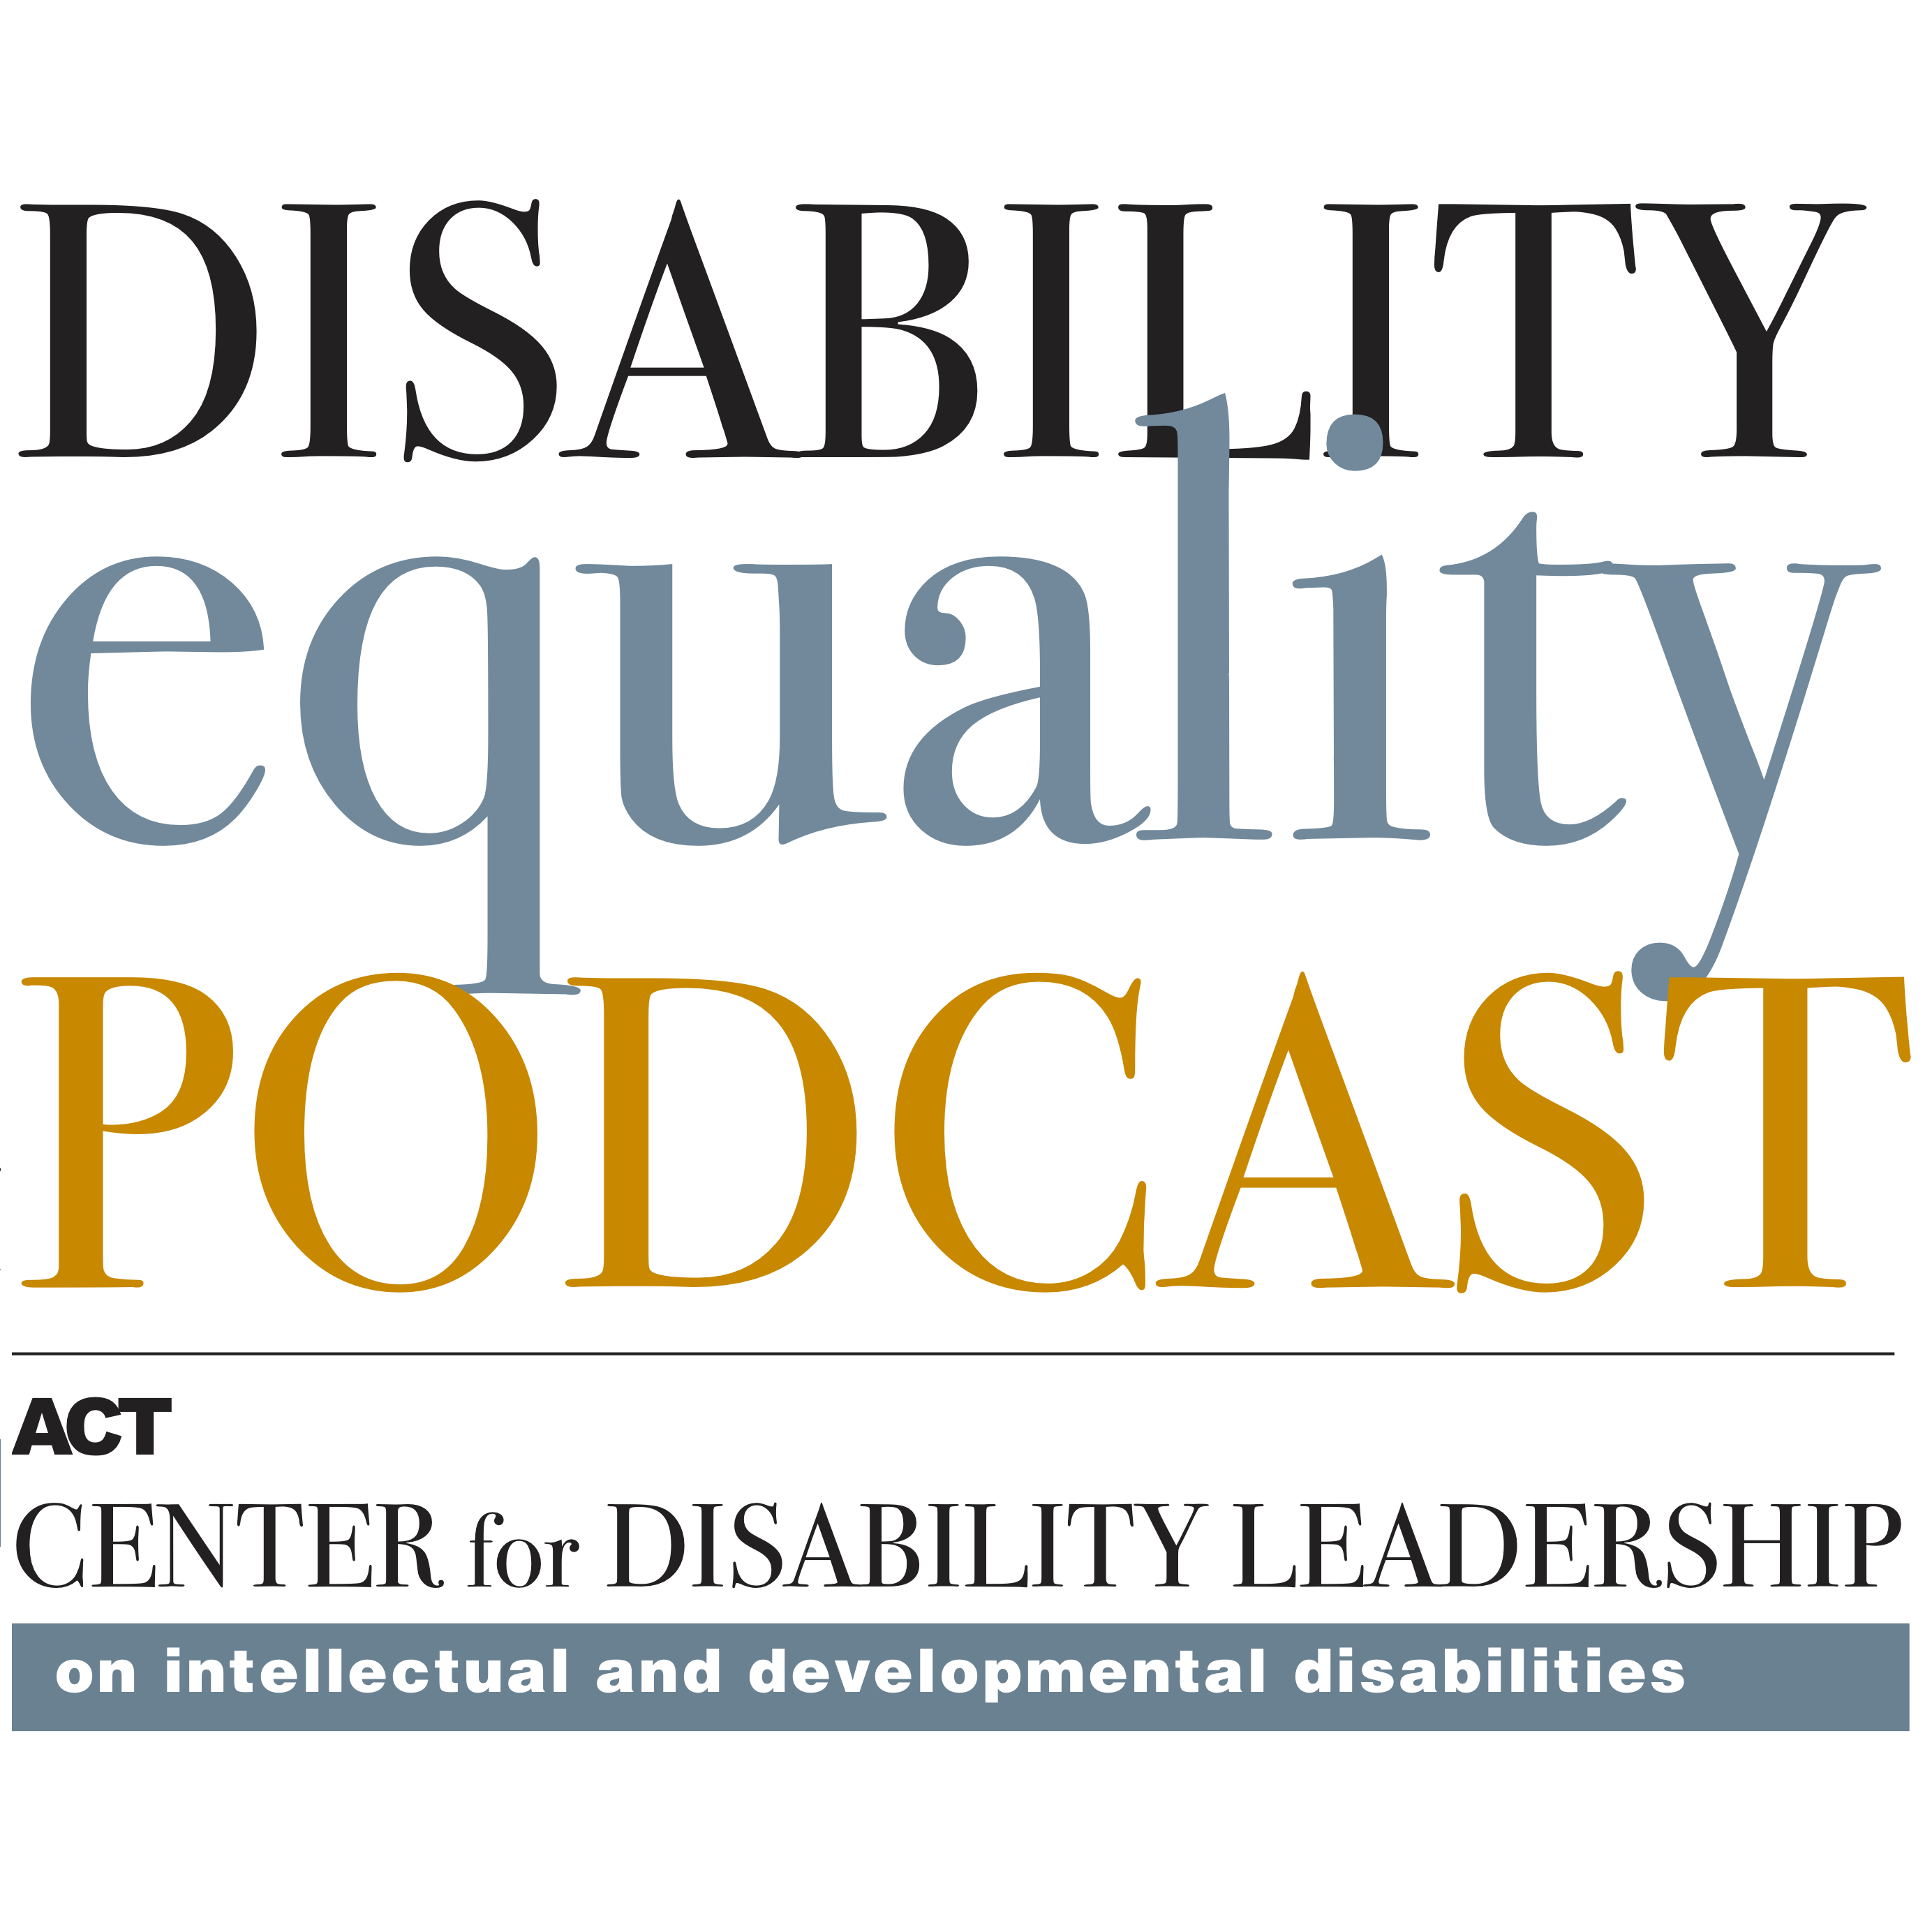 Disability Equality Podcast